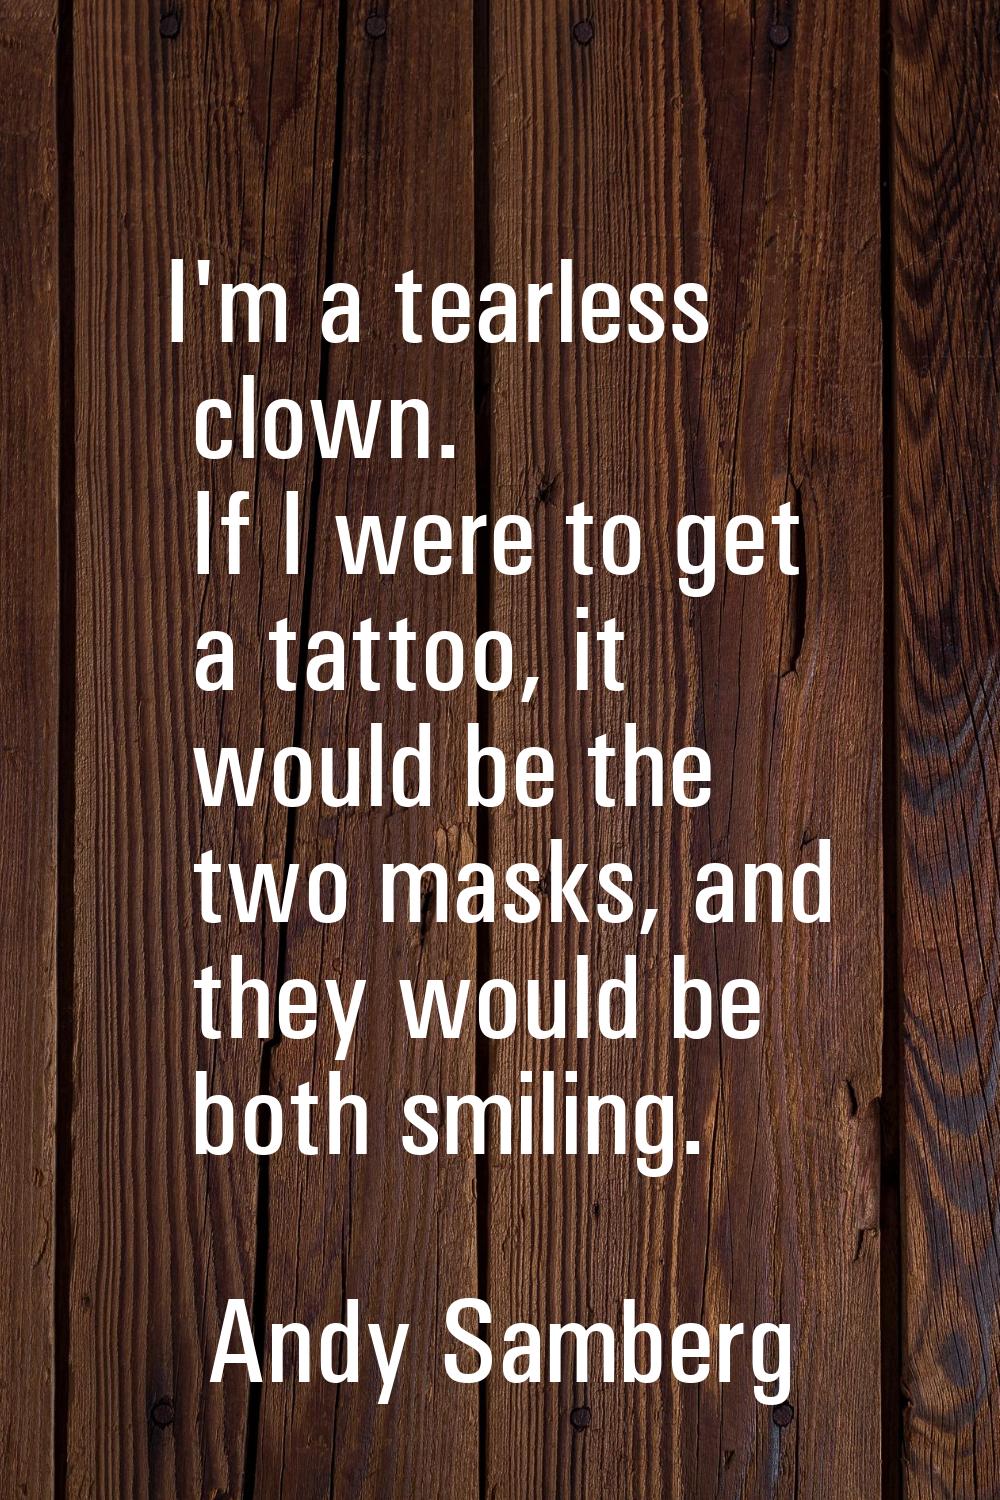 I'm a tearless clown. If I were to get a tattoo, it would be the two masks, and they would be both 